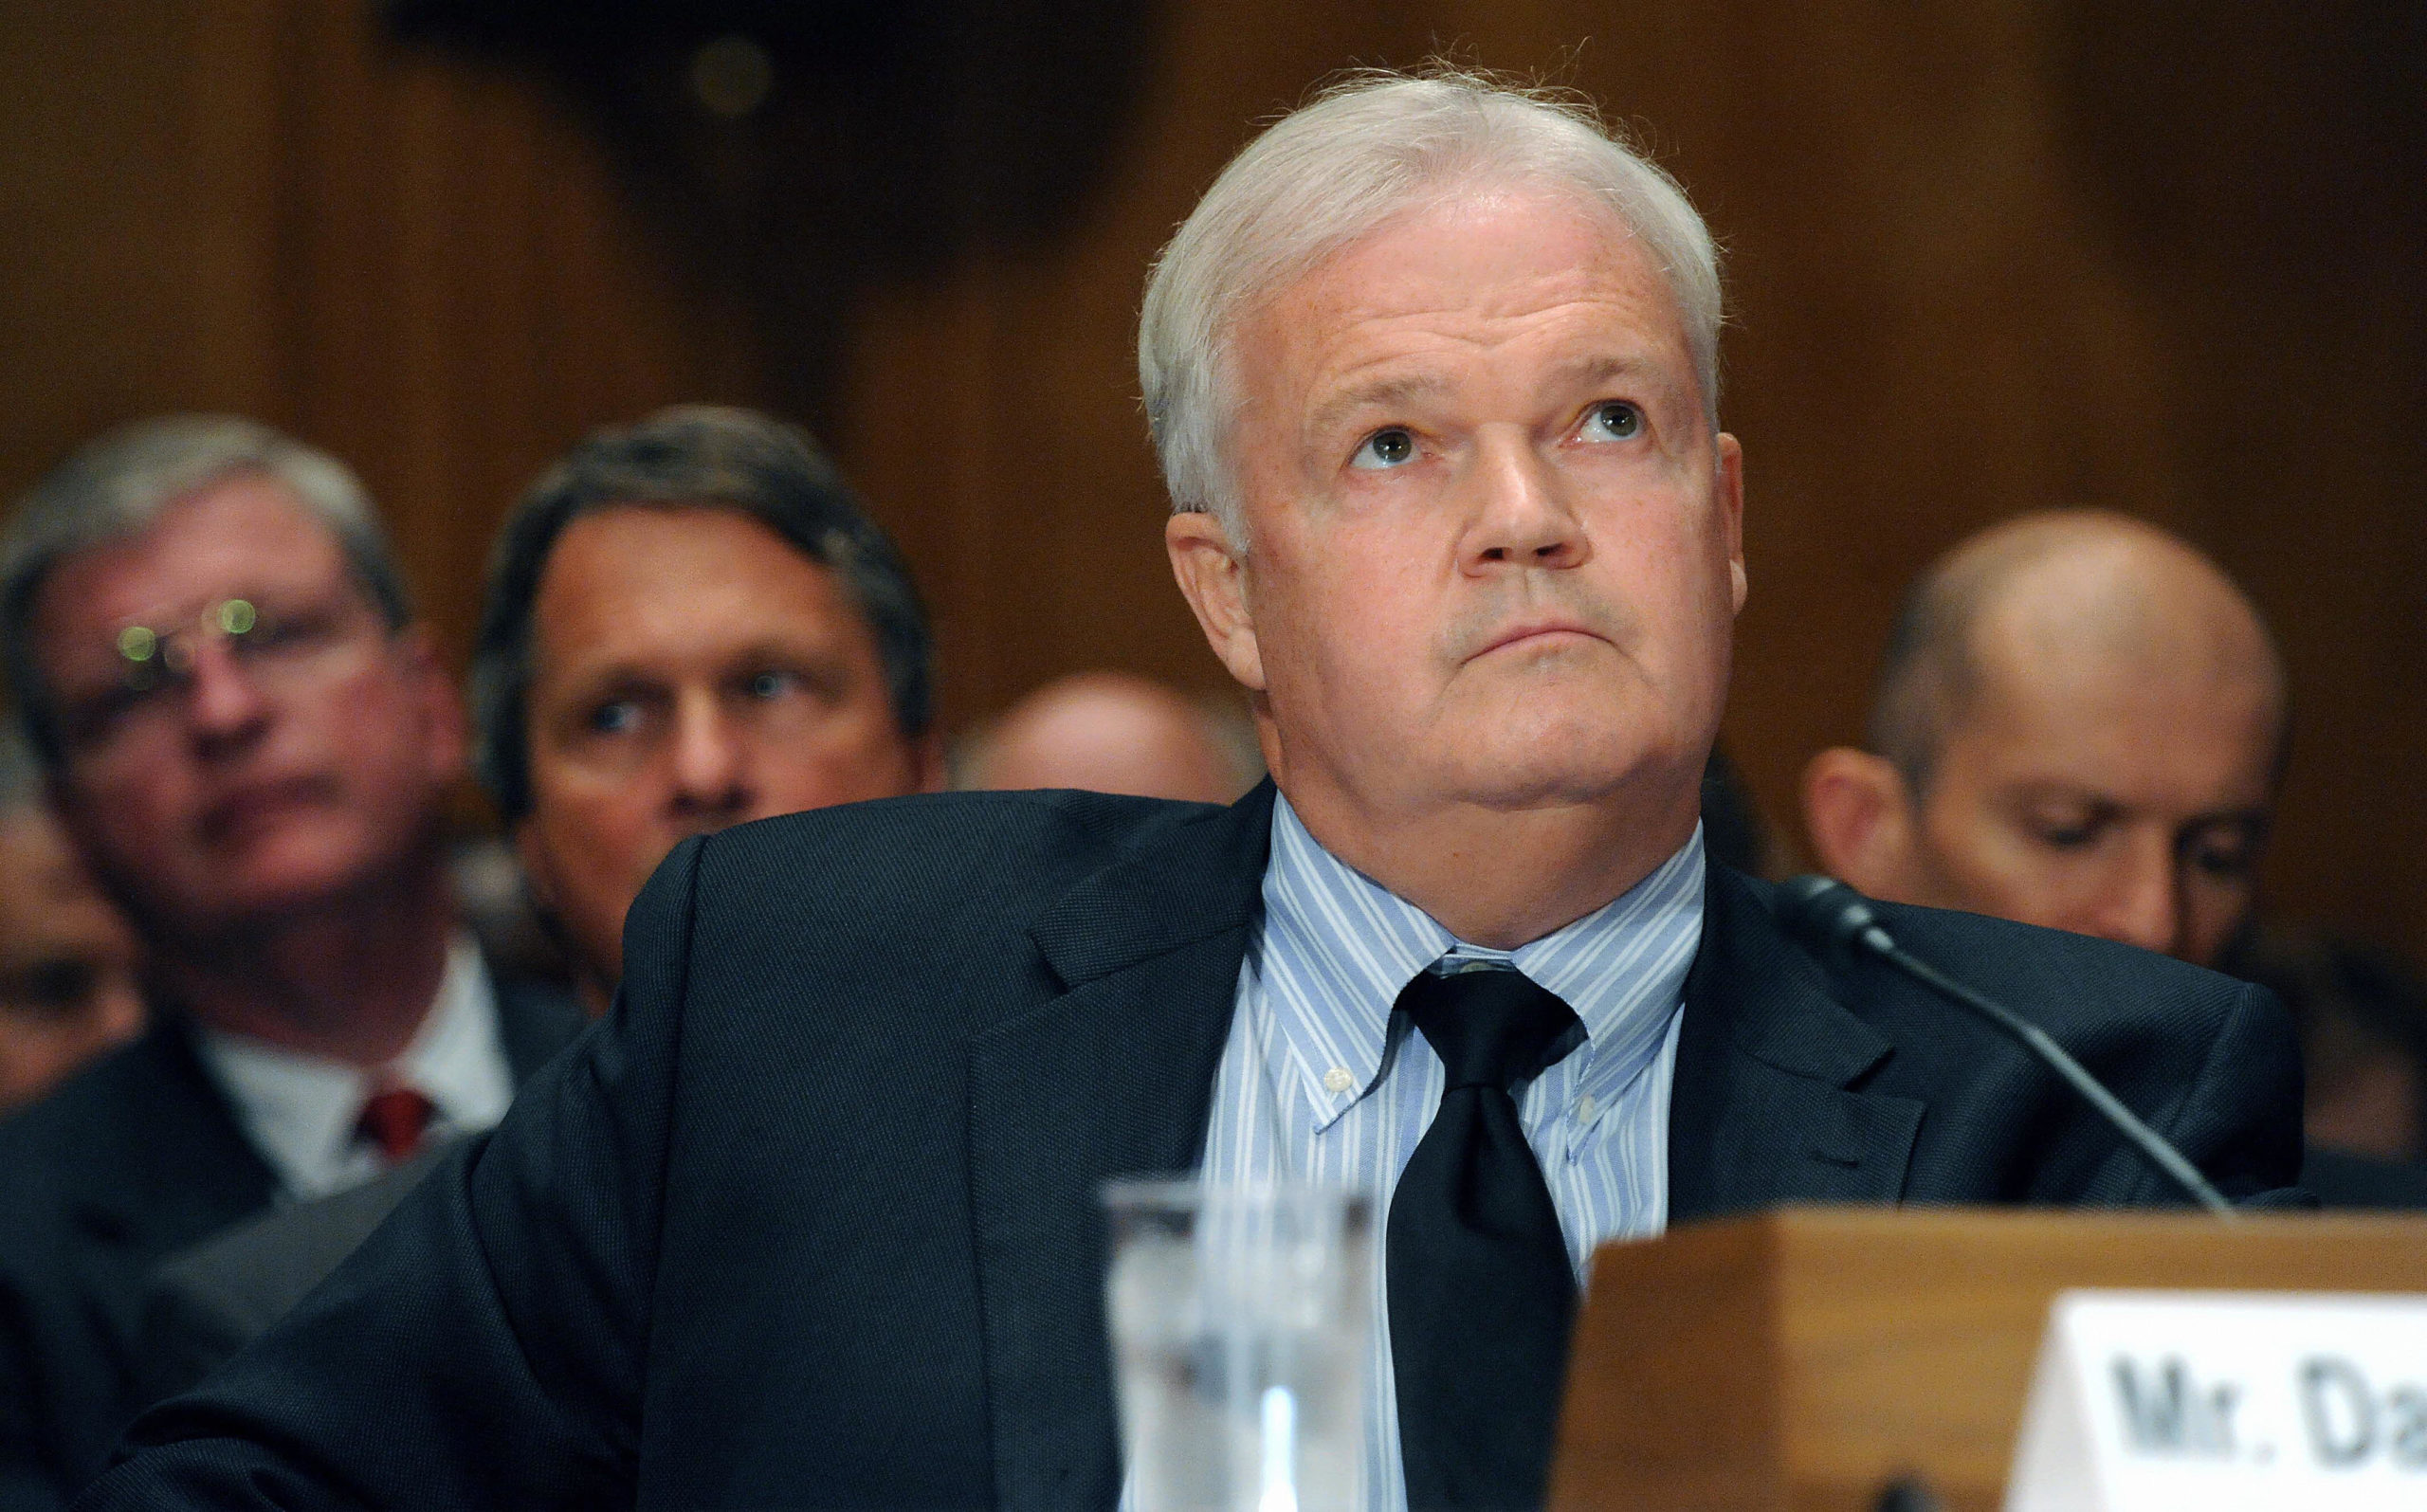 David C. Williams testifies on Capitol Hill in 2009 when he was inspector general of the U.S. Postal Service. (Tim Sloan/AFP via Getty Images)